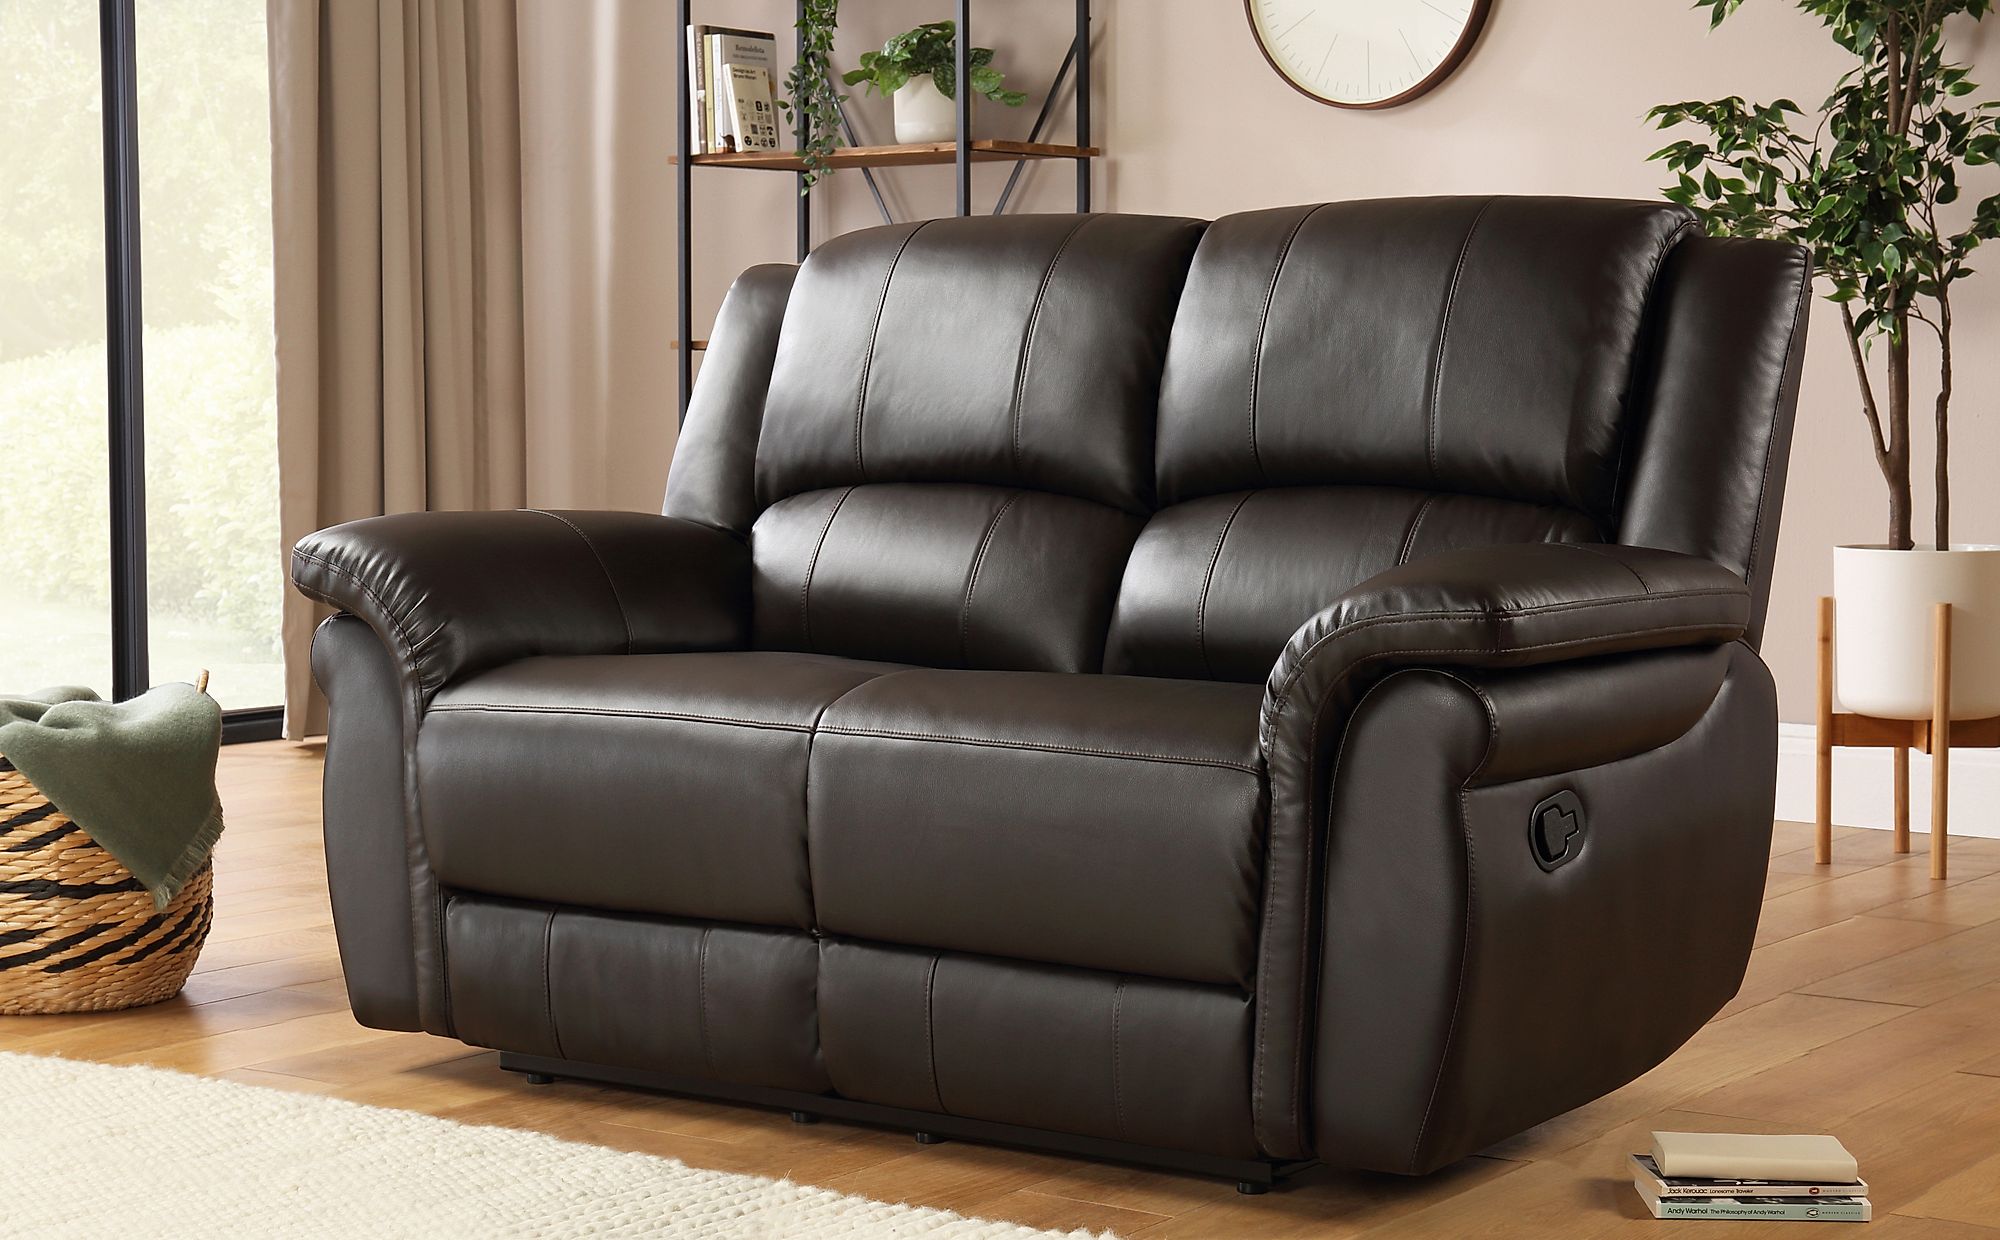 2 seat recliner sofa light brown bonded leather